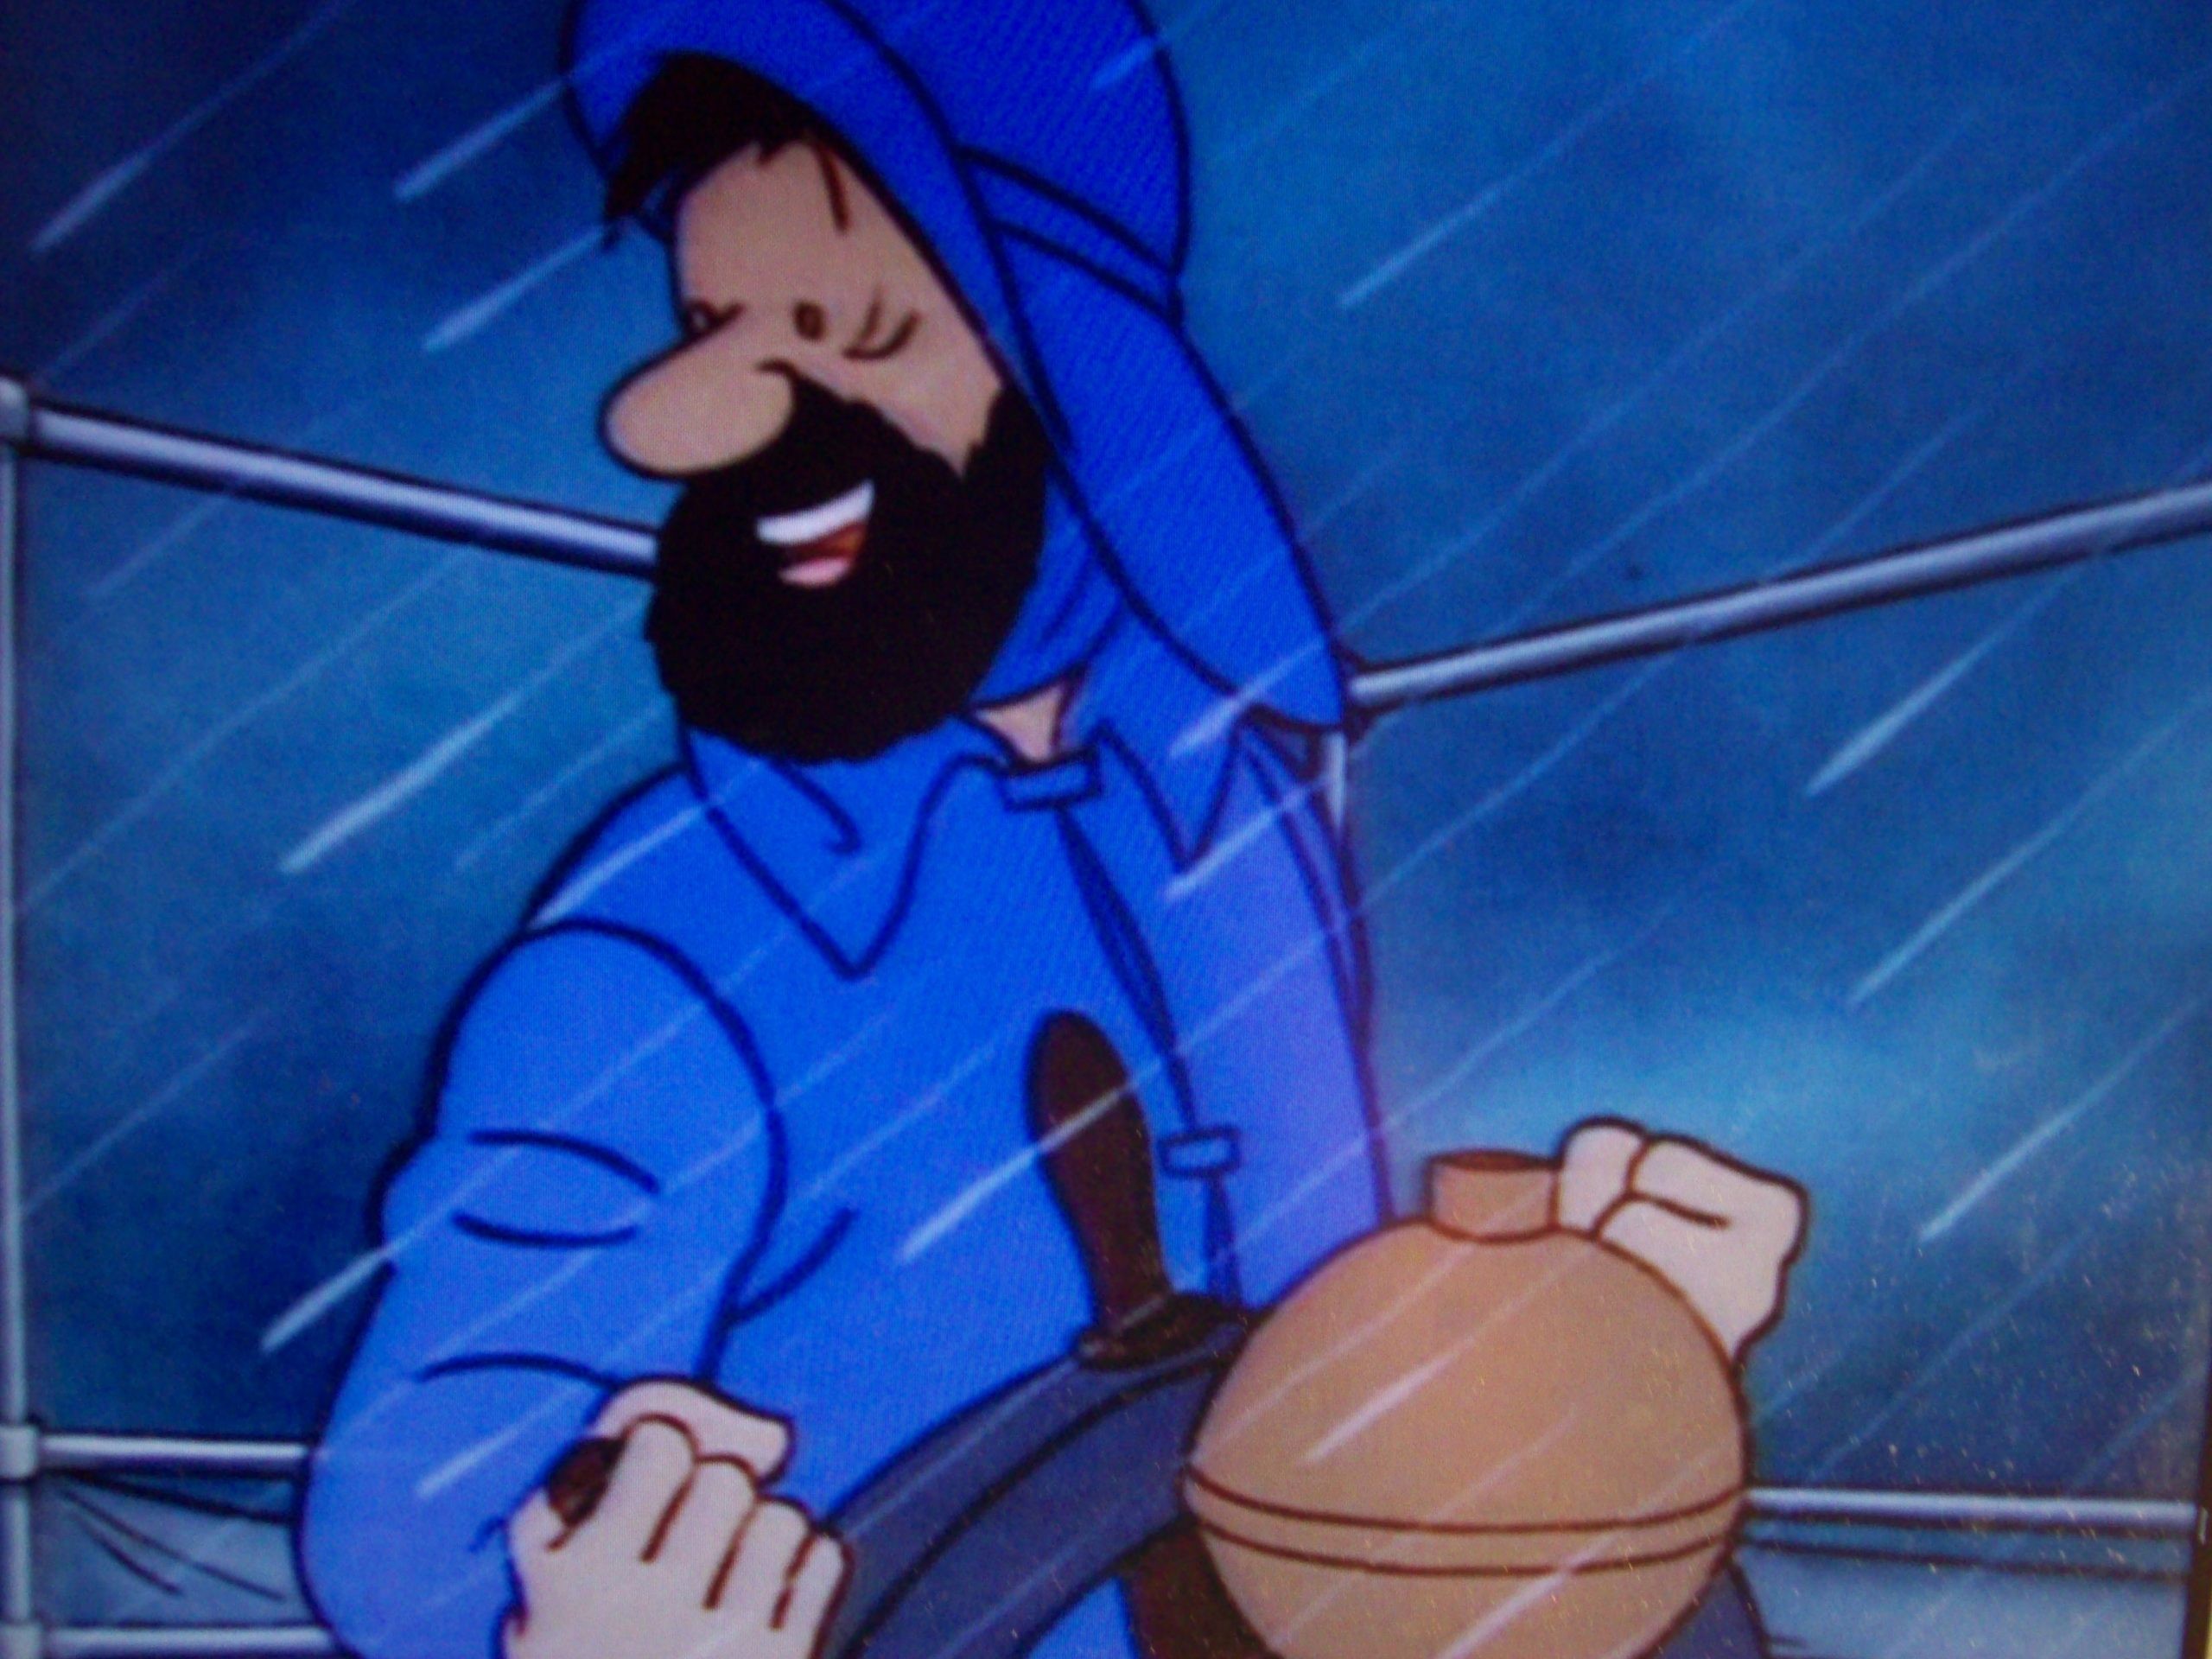 2560x1920 Tintin images Captain Haddock HD wallpaper and background photos